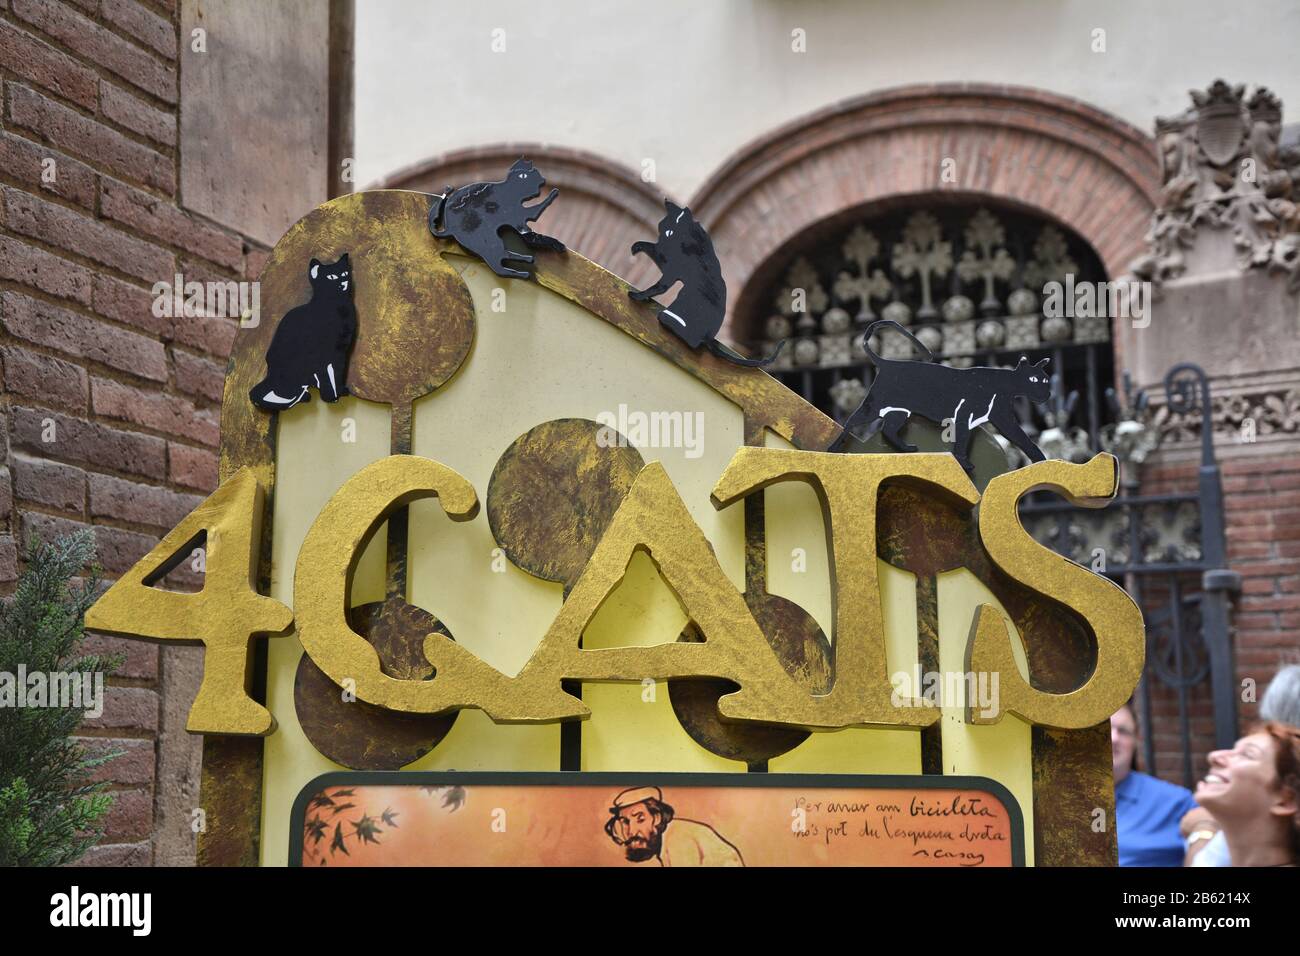 BARCELONA, SPAIN - AUGUST 08, 2014: Els Quatre Gats cafe in Barri Gotic district. Els 4 Gats was visited by famous artists Gaudi and Picasso Stock Photo